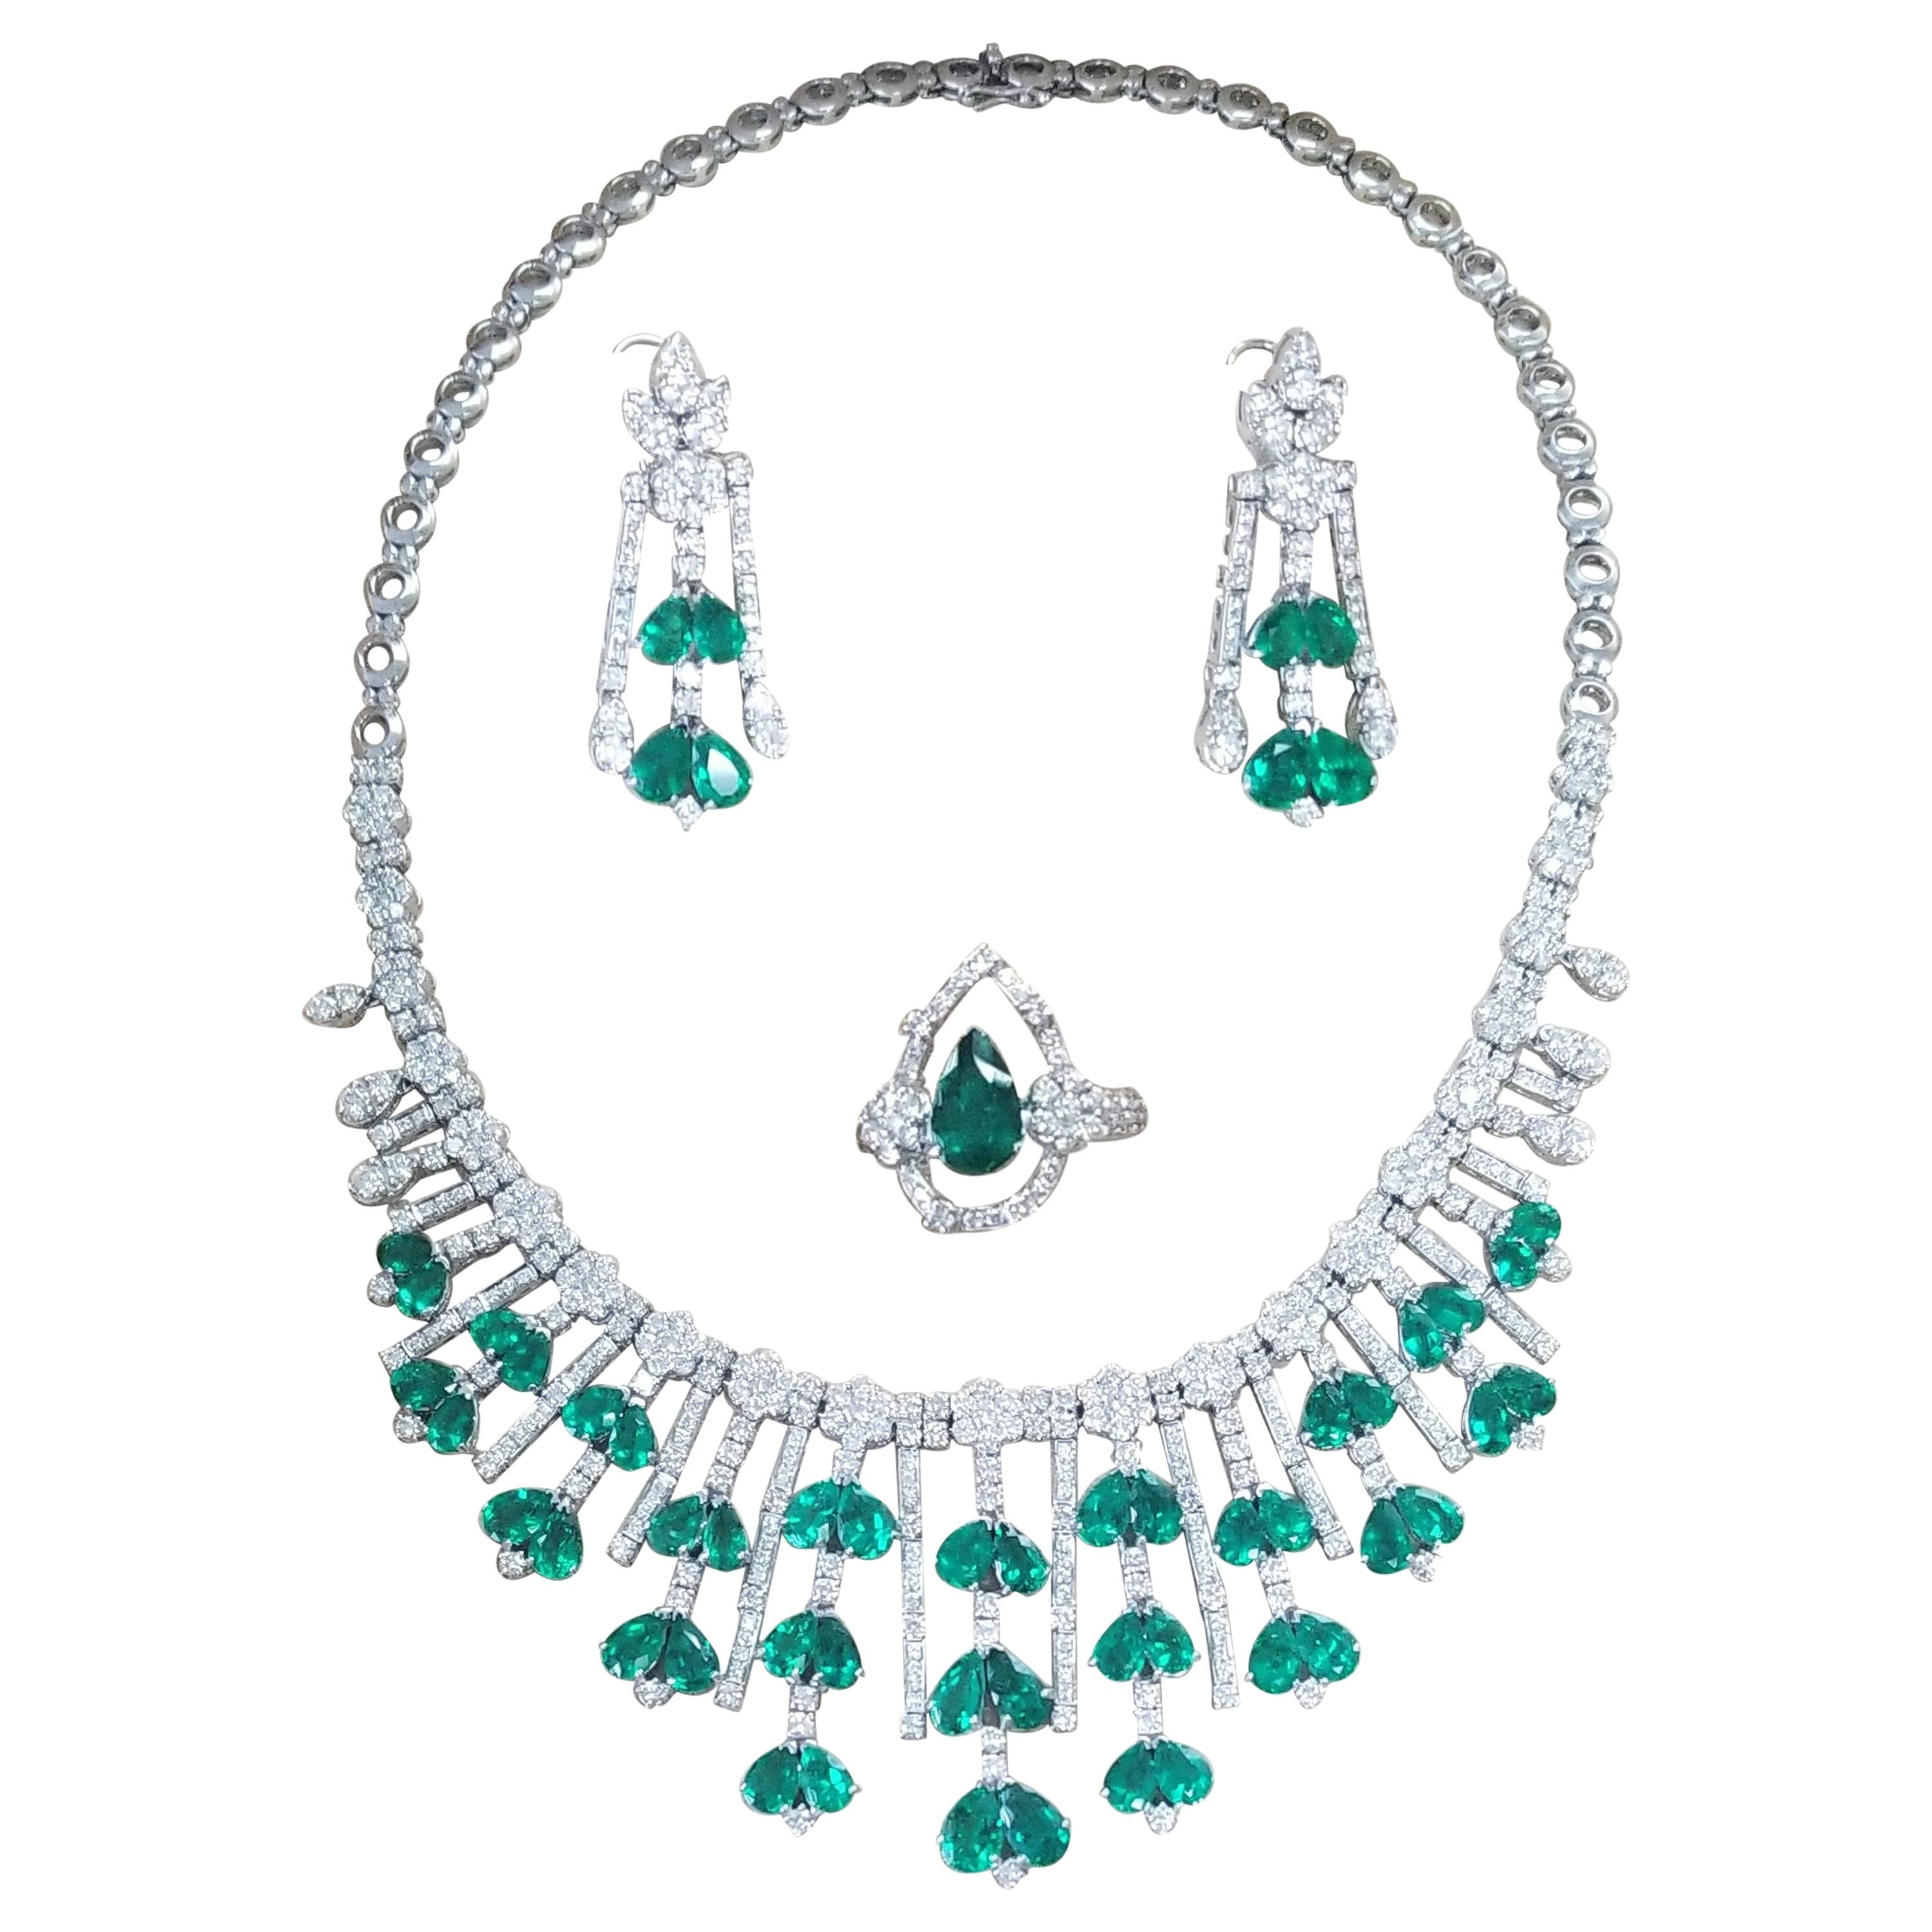 Natural Matching Colombian Pear Shape Emeralds and Diamonds Set